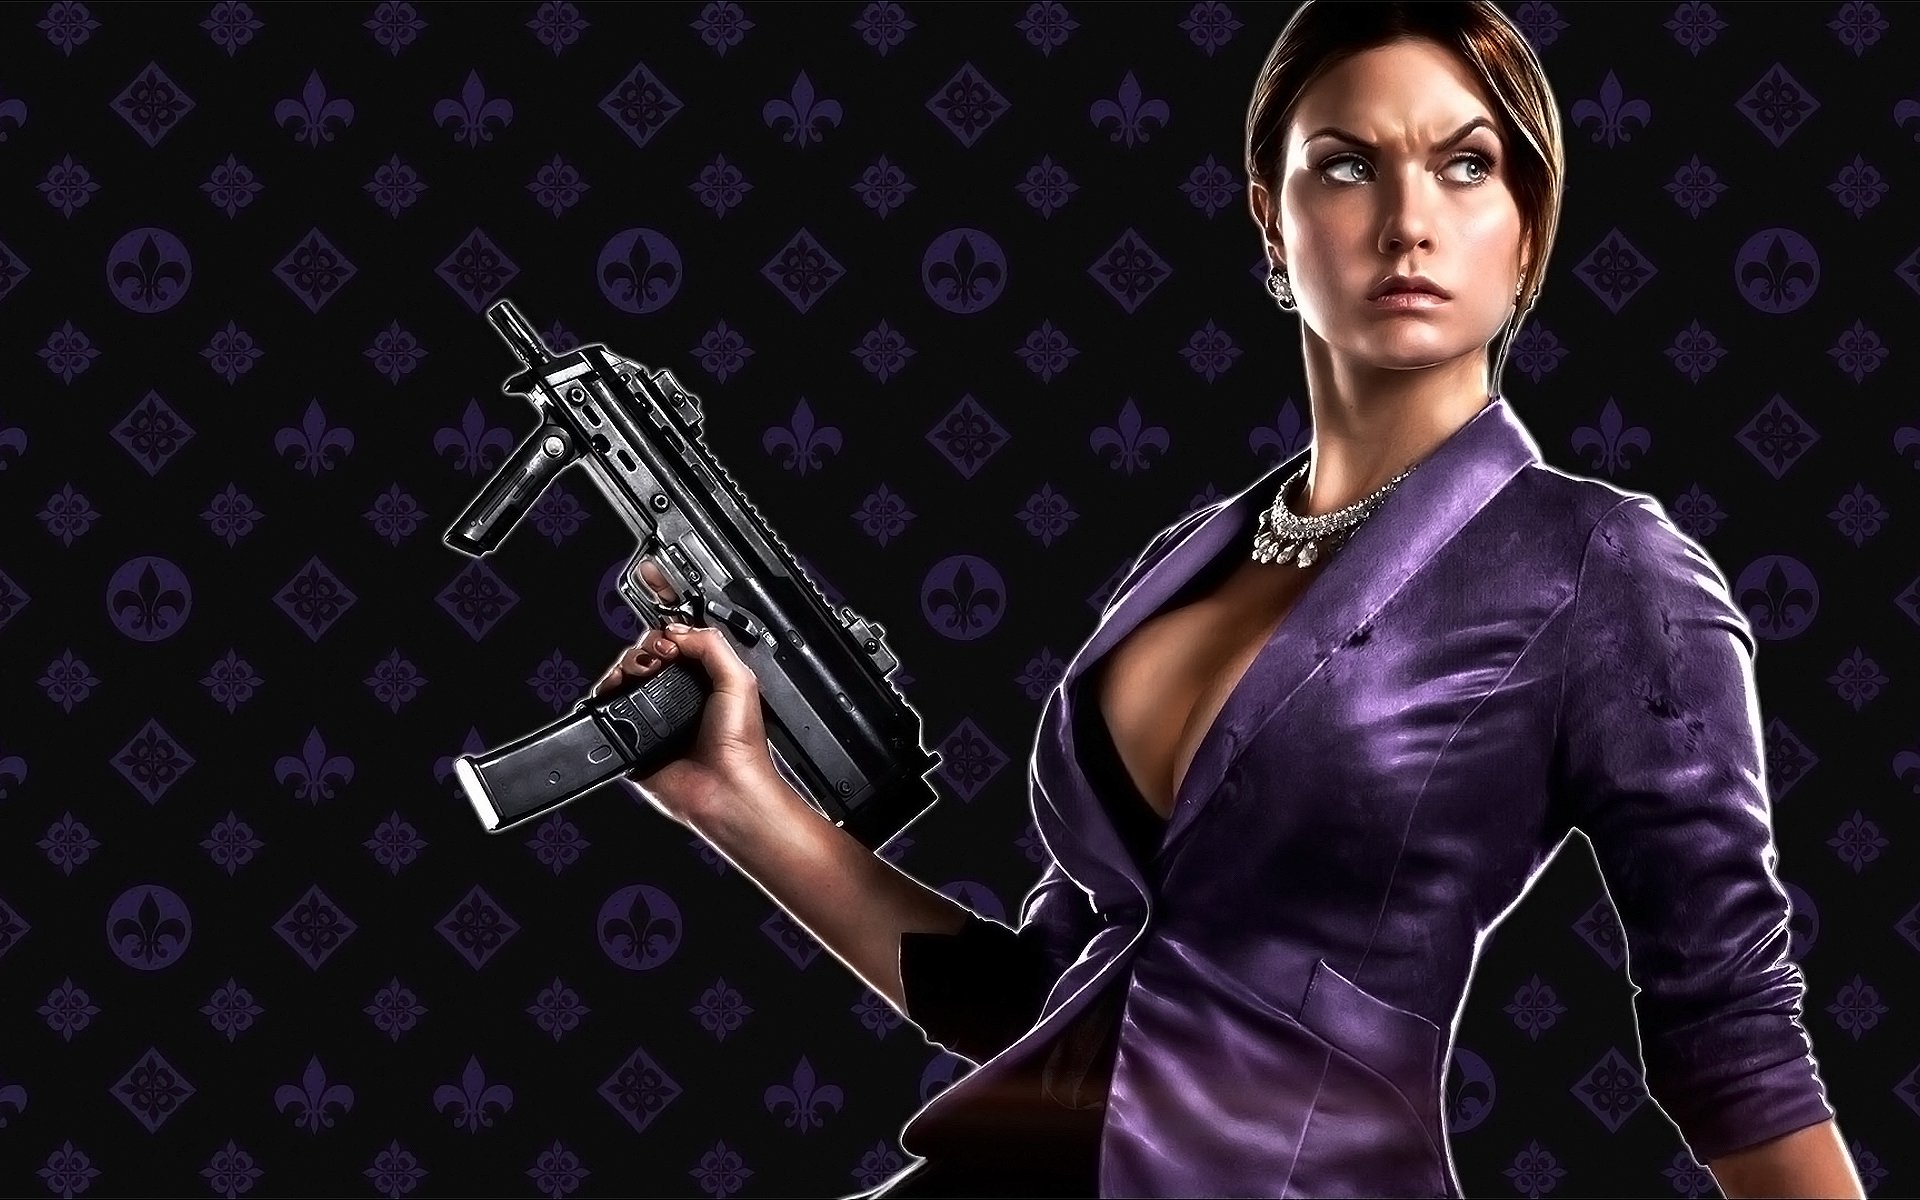 Saints Row 4 Wallpaper  The threesome by PhoneGraphics on DeviantArt